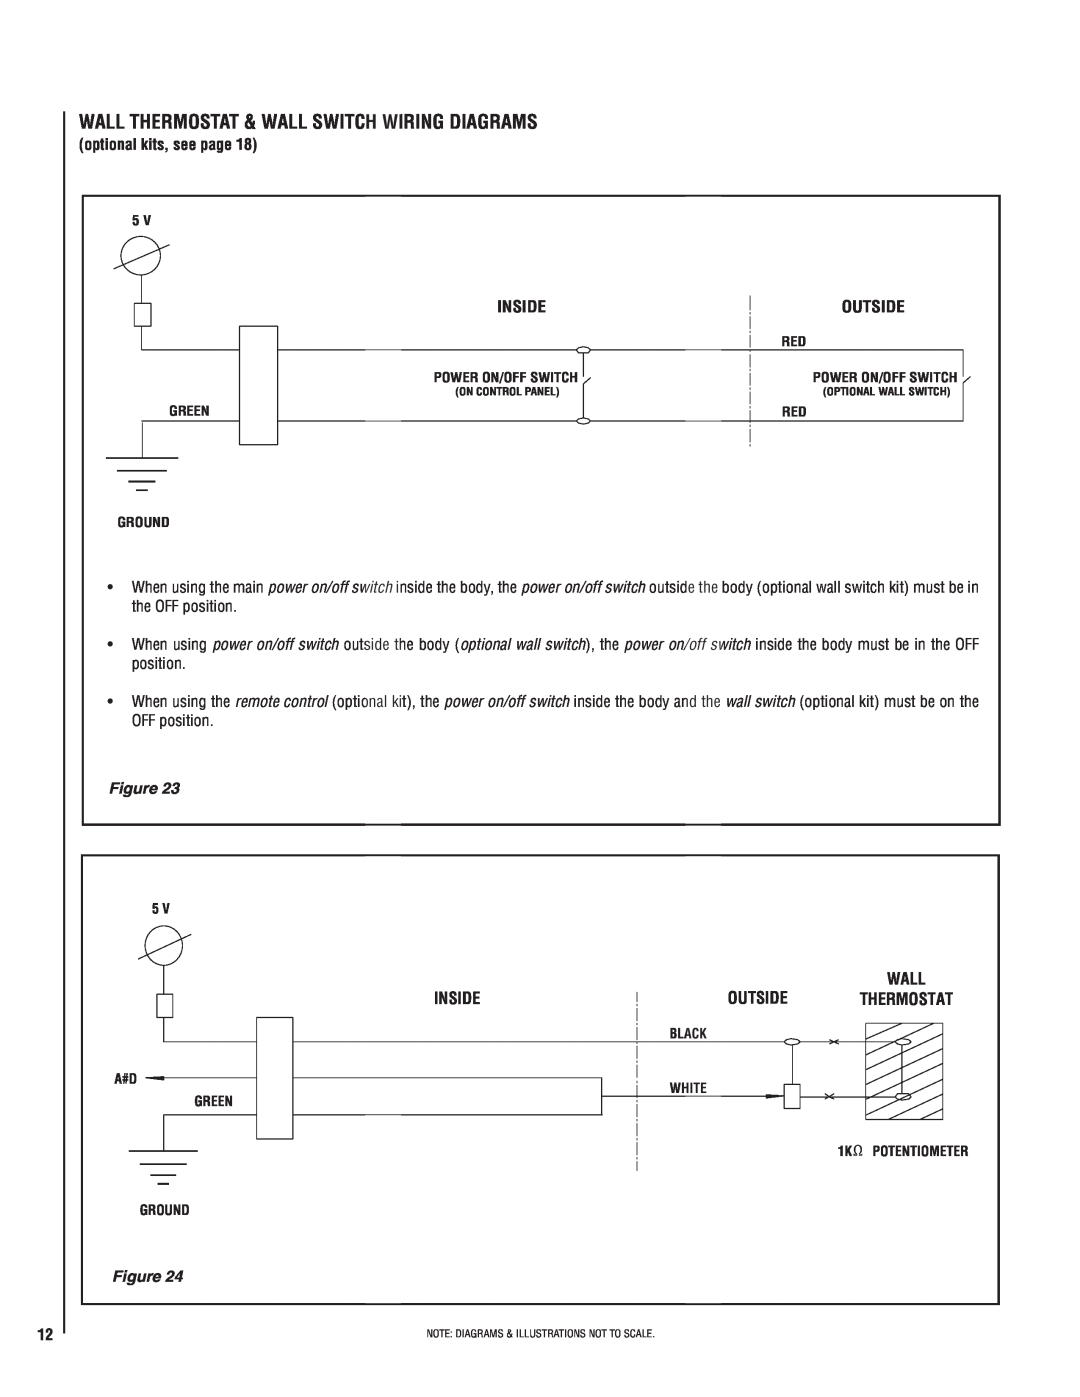 Lennox Hearth MPE-36R installation instructions Wall Thermostat & Wall Switch Wiring Diagrams, Inside, Outside 